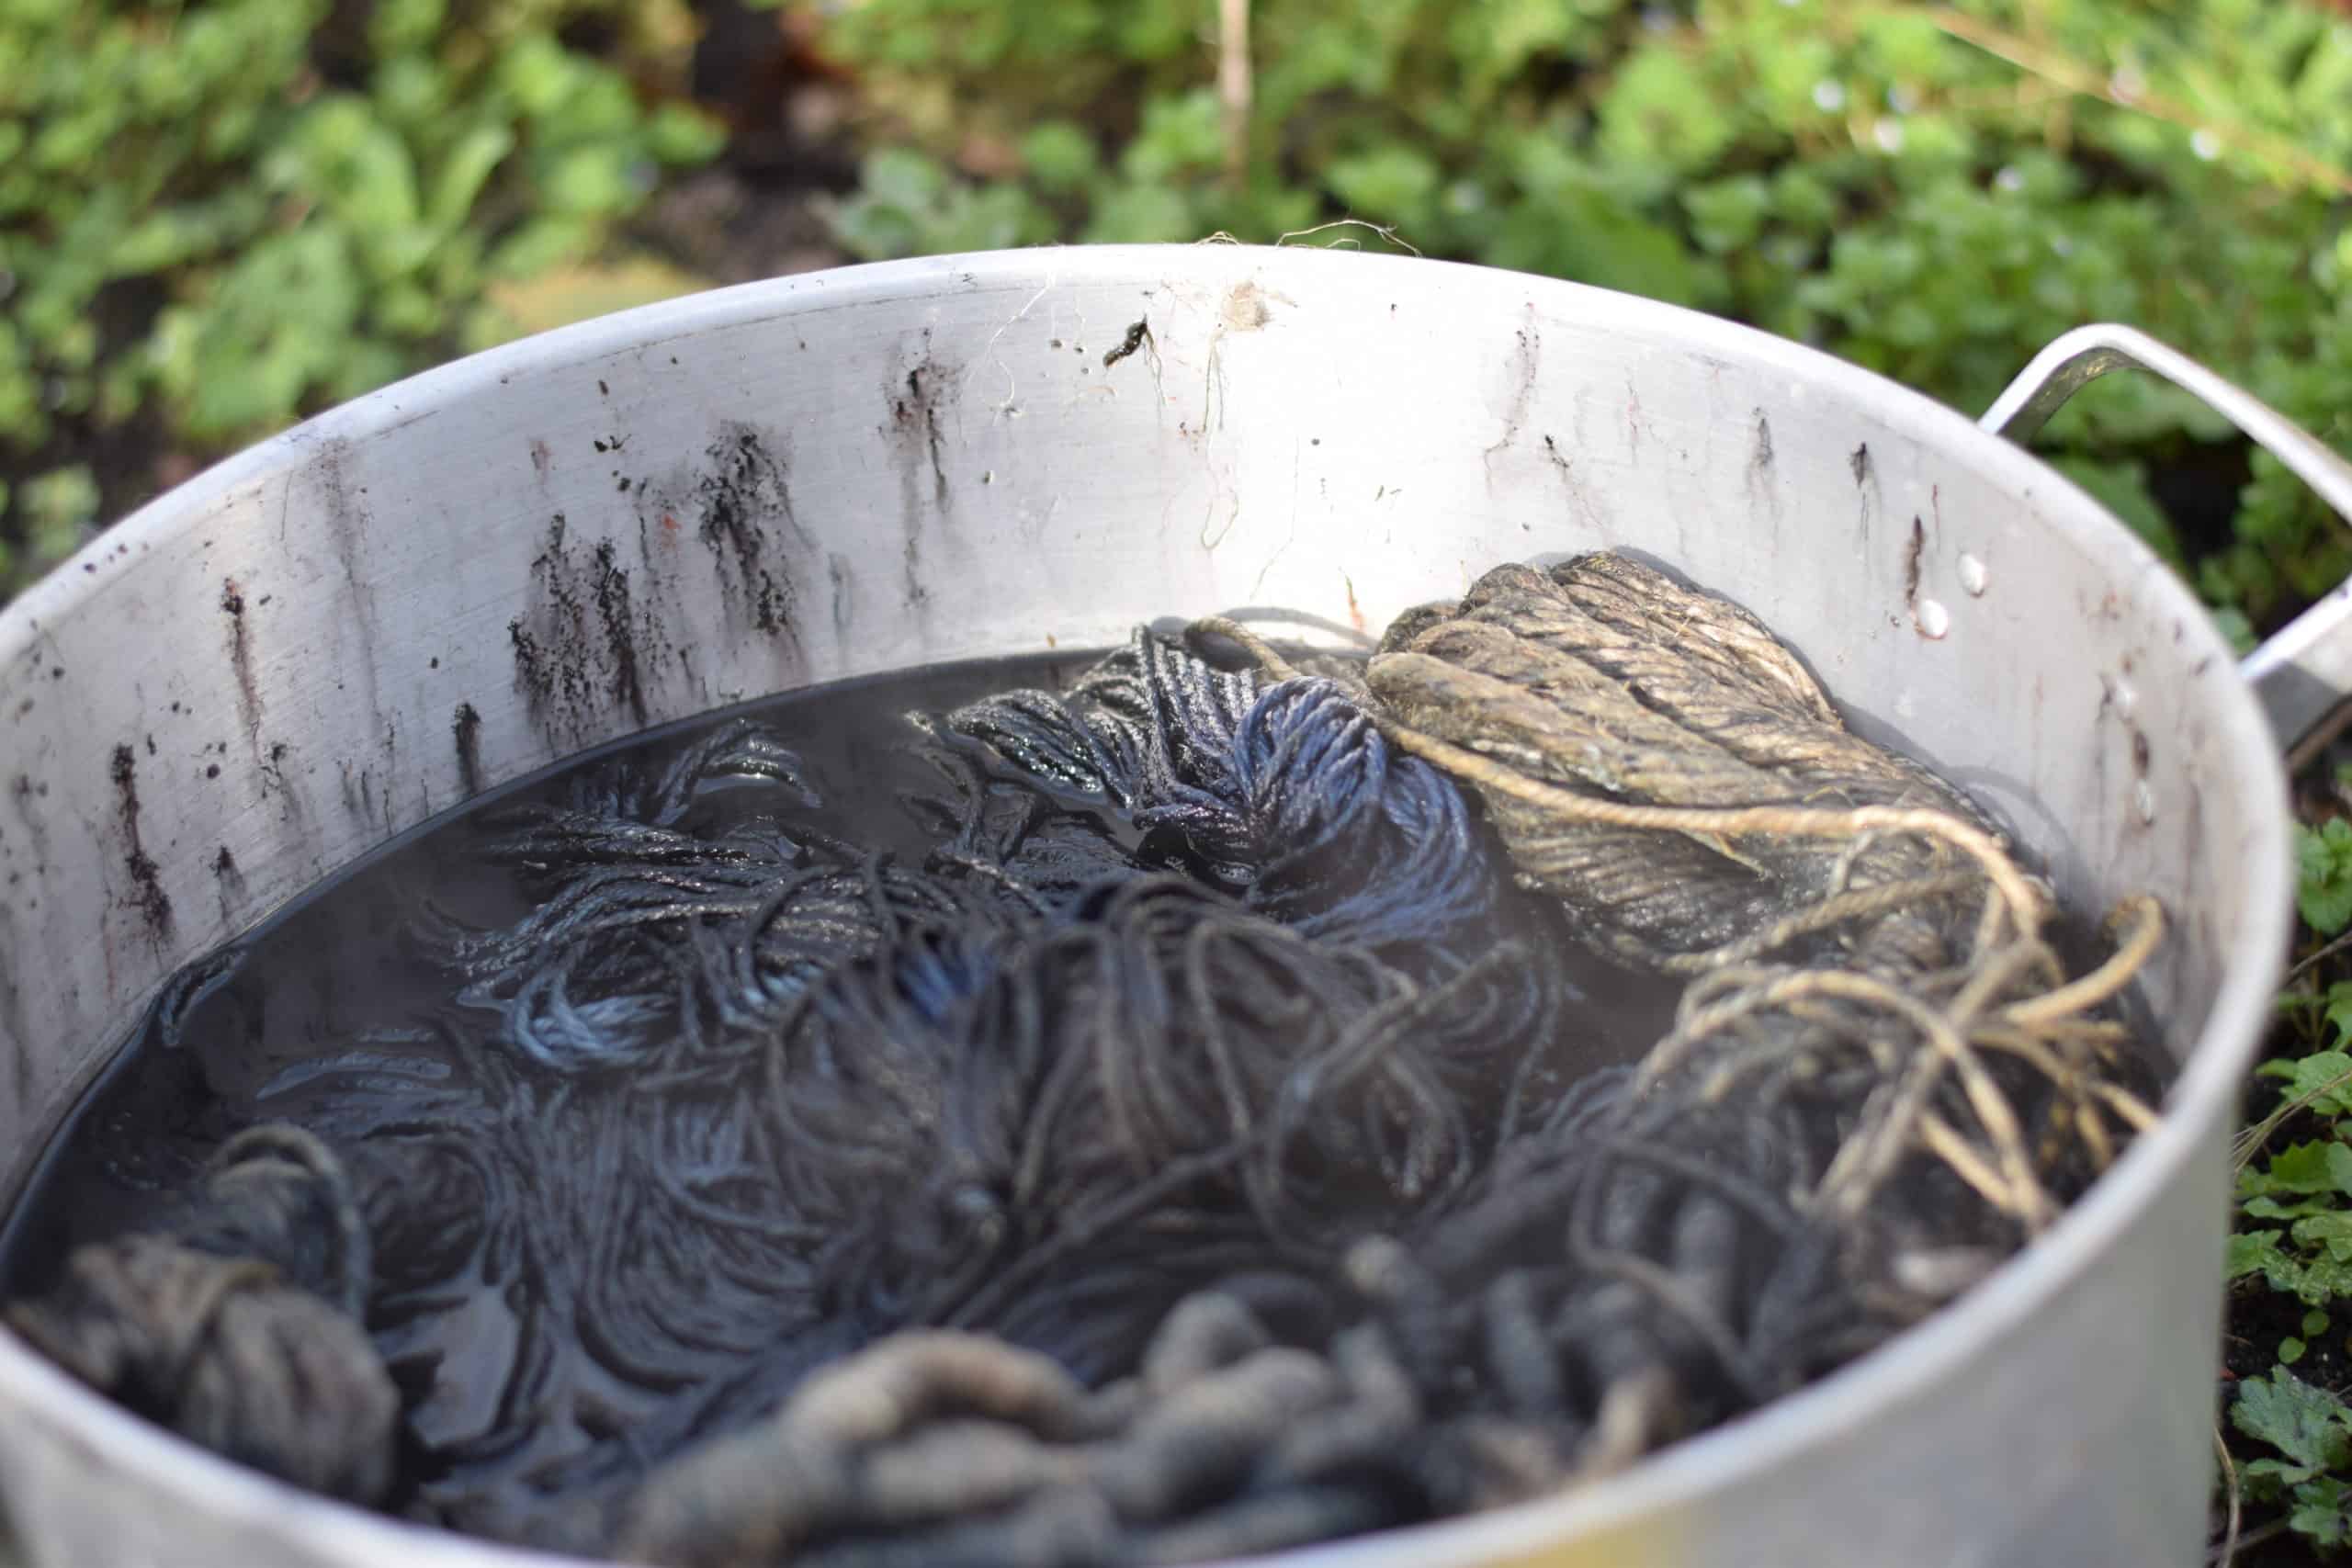 Picture of balls of linen string being dyed in a metalic cauldron